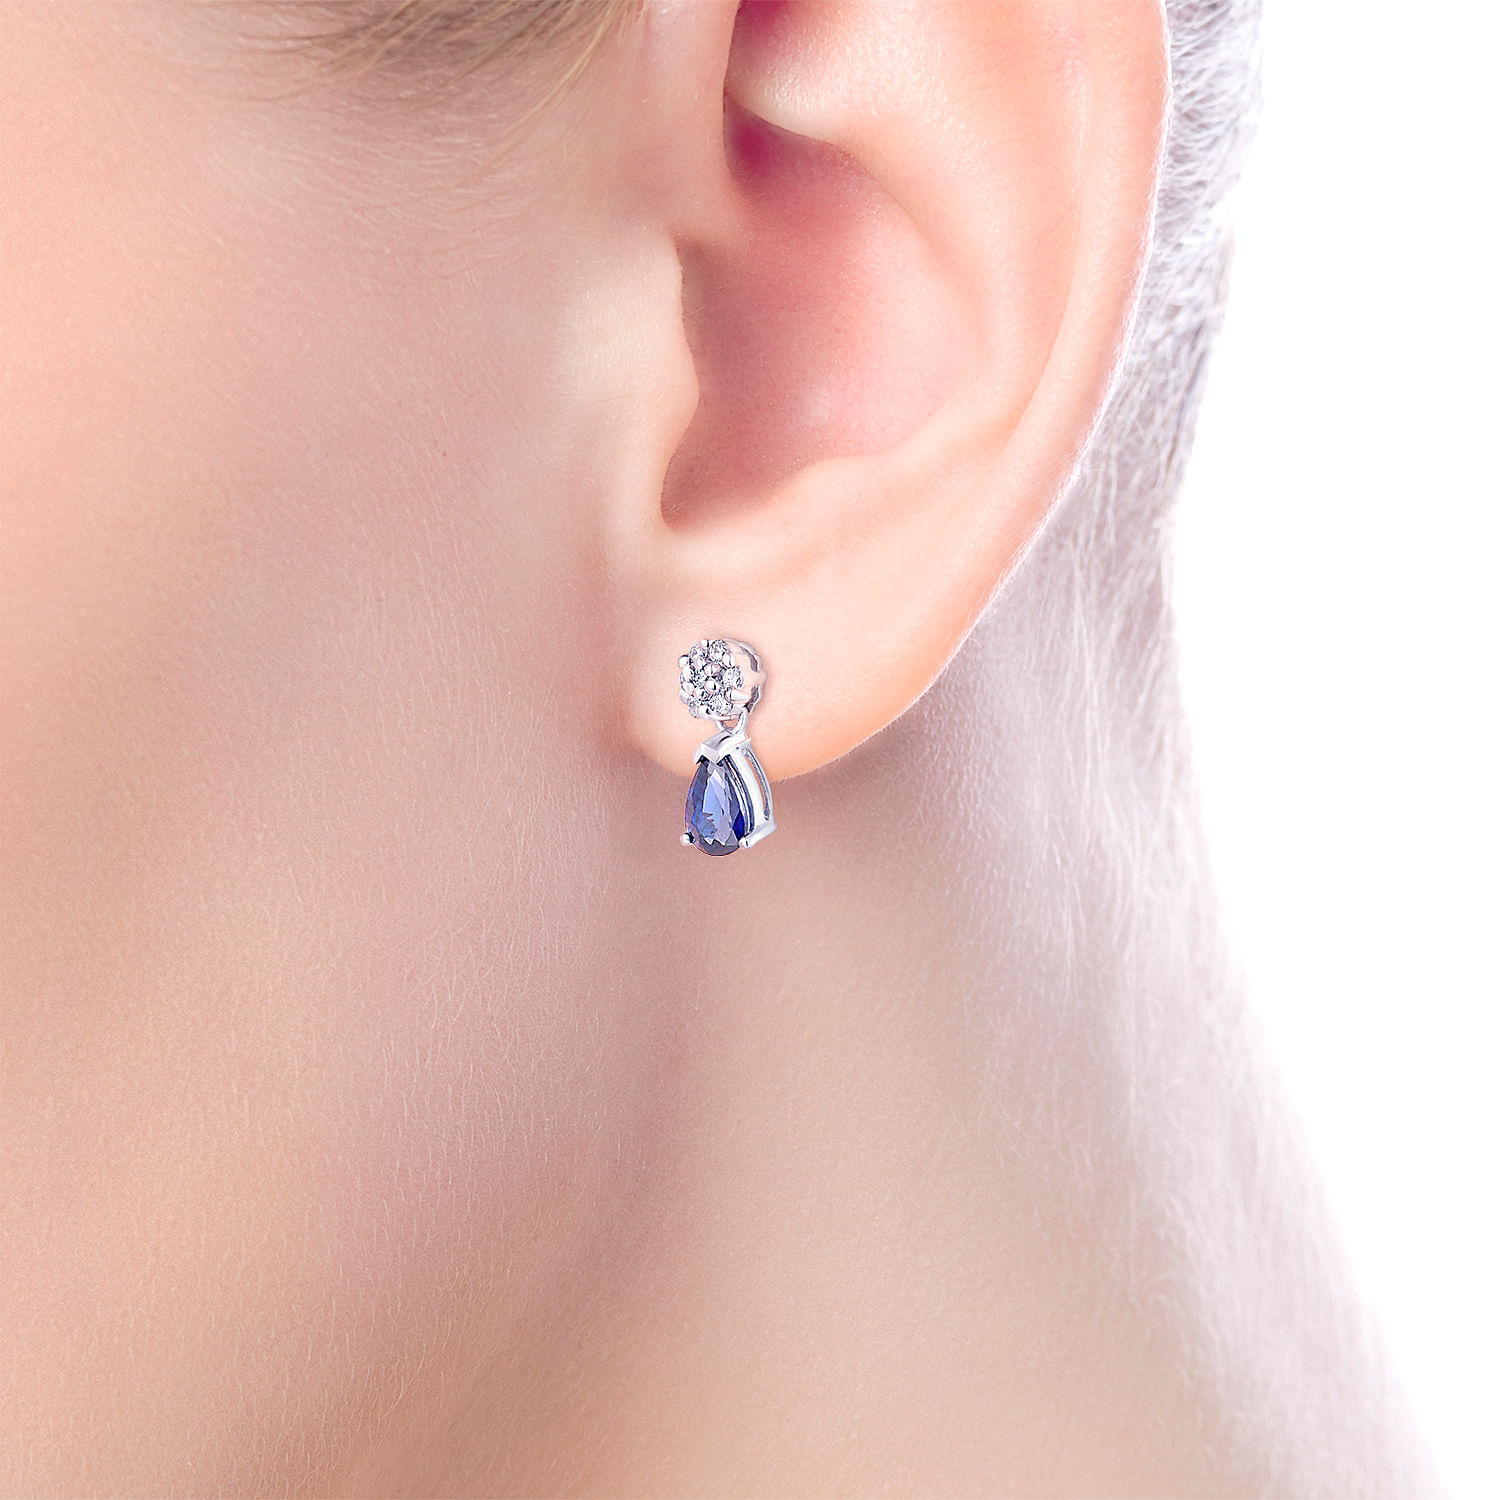 14K White Gold Floral Diamond Stud Earrings with Pear Shaped Sapphire Drops